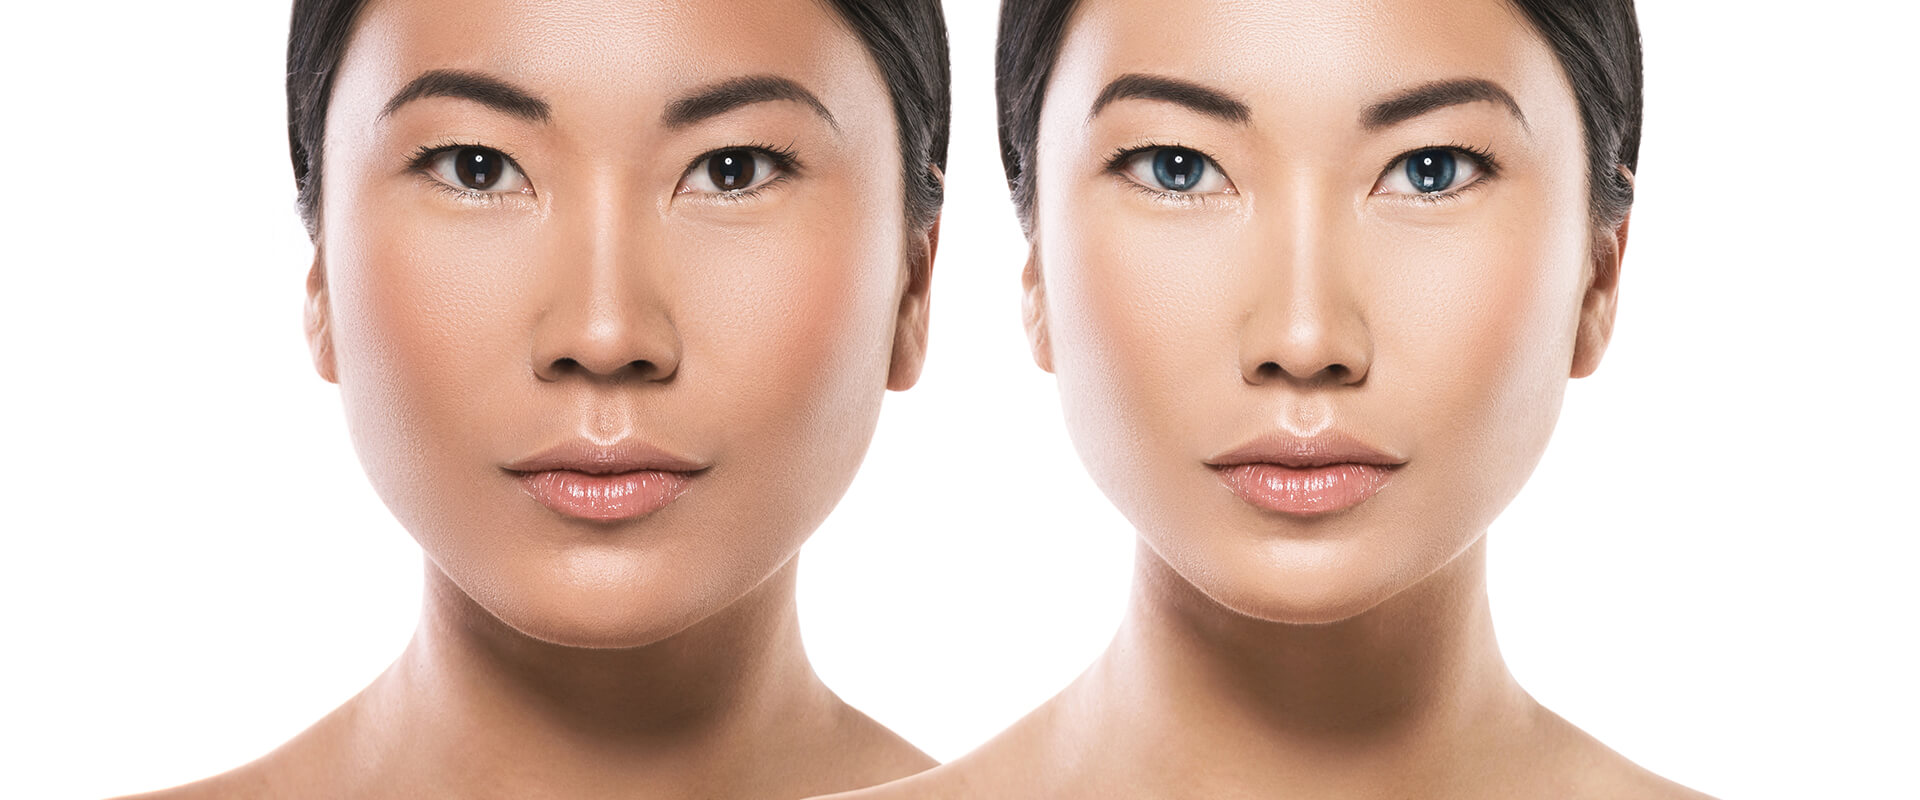 Facial Contouring (Orthognathic Surgery)